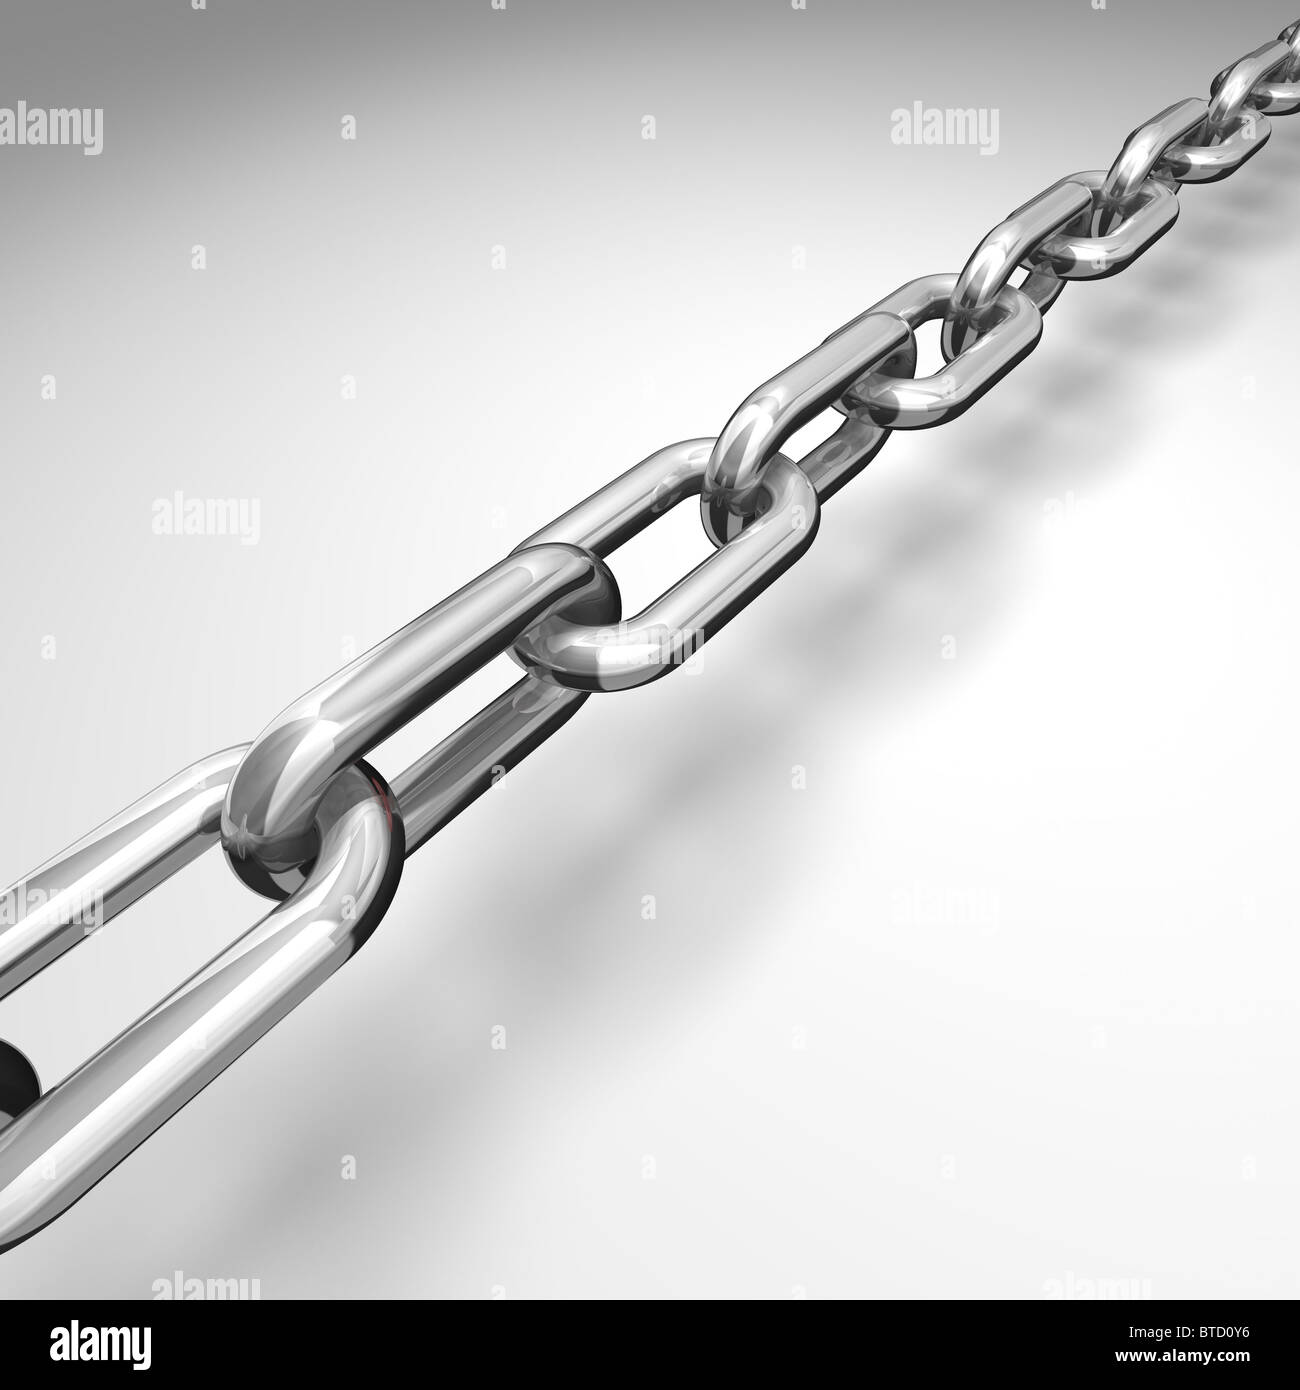 3d illustration of a silver chain - conceptual image Stock Photo